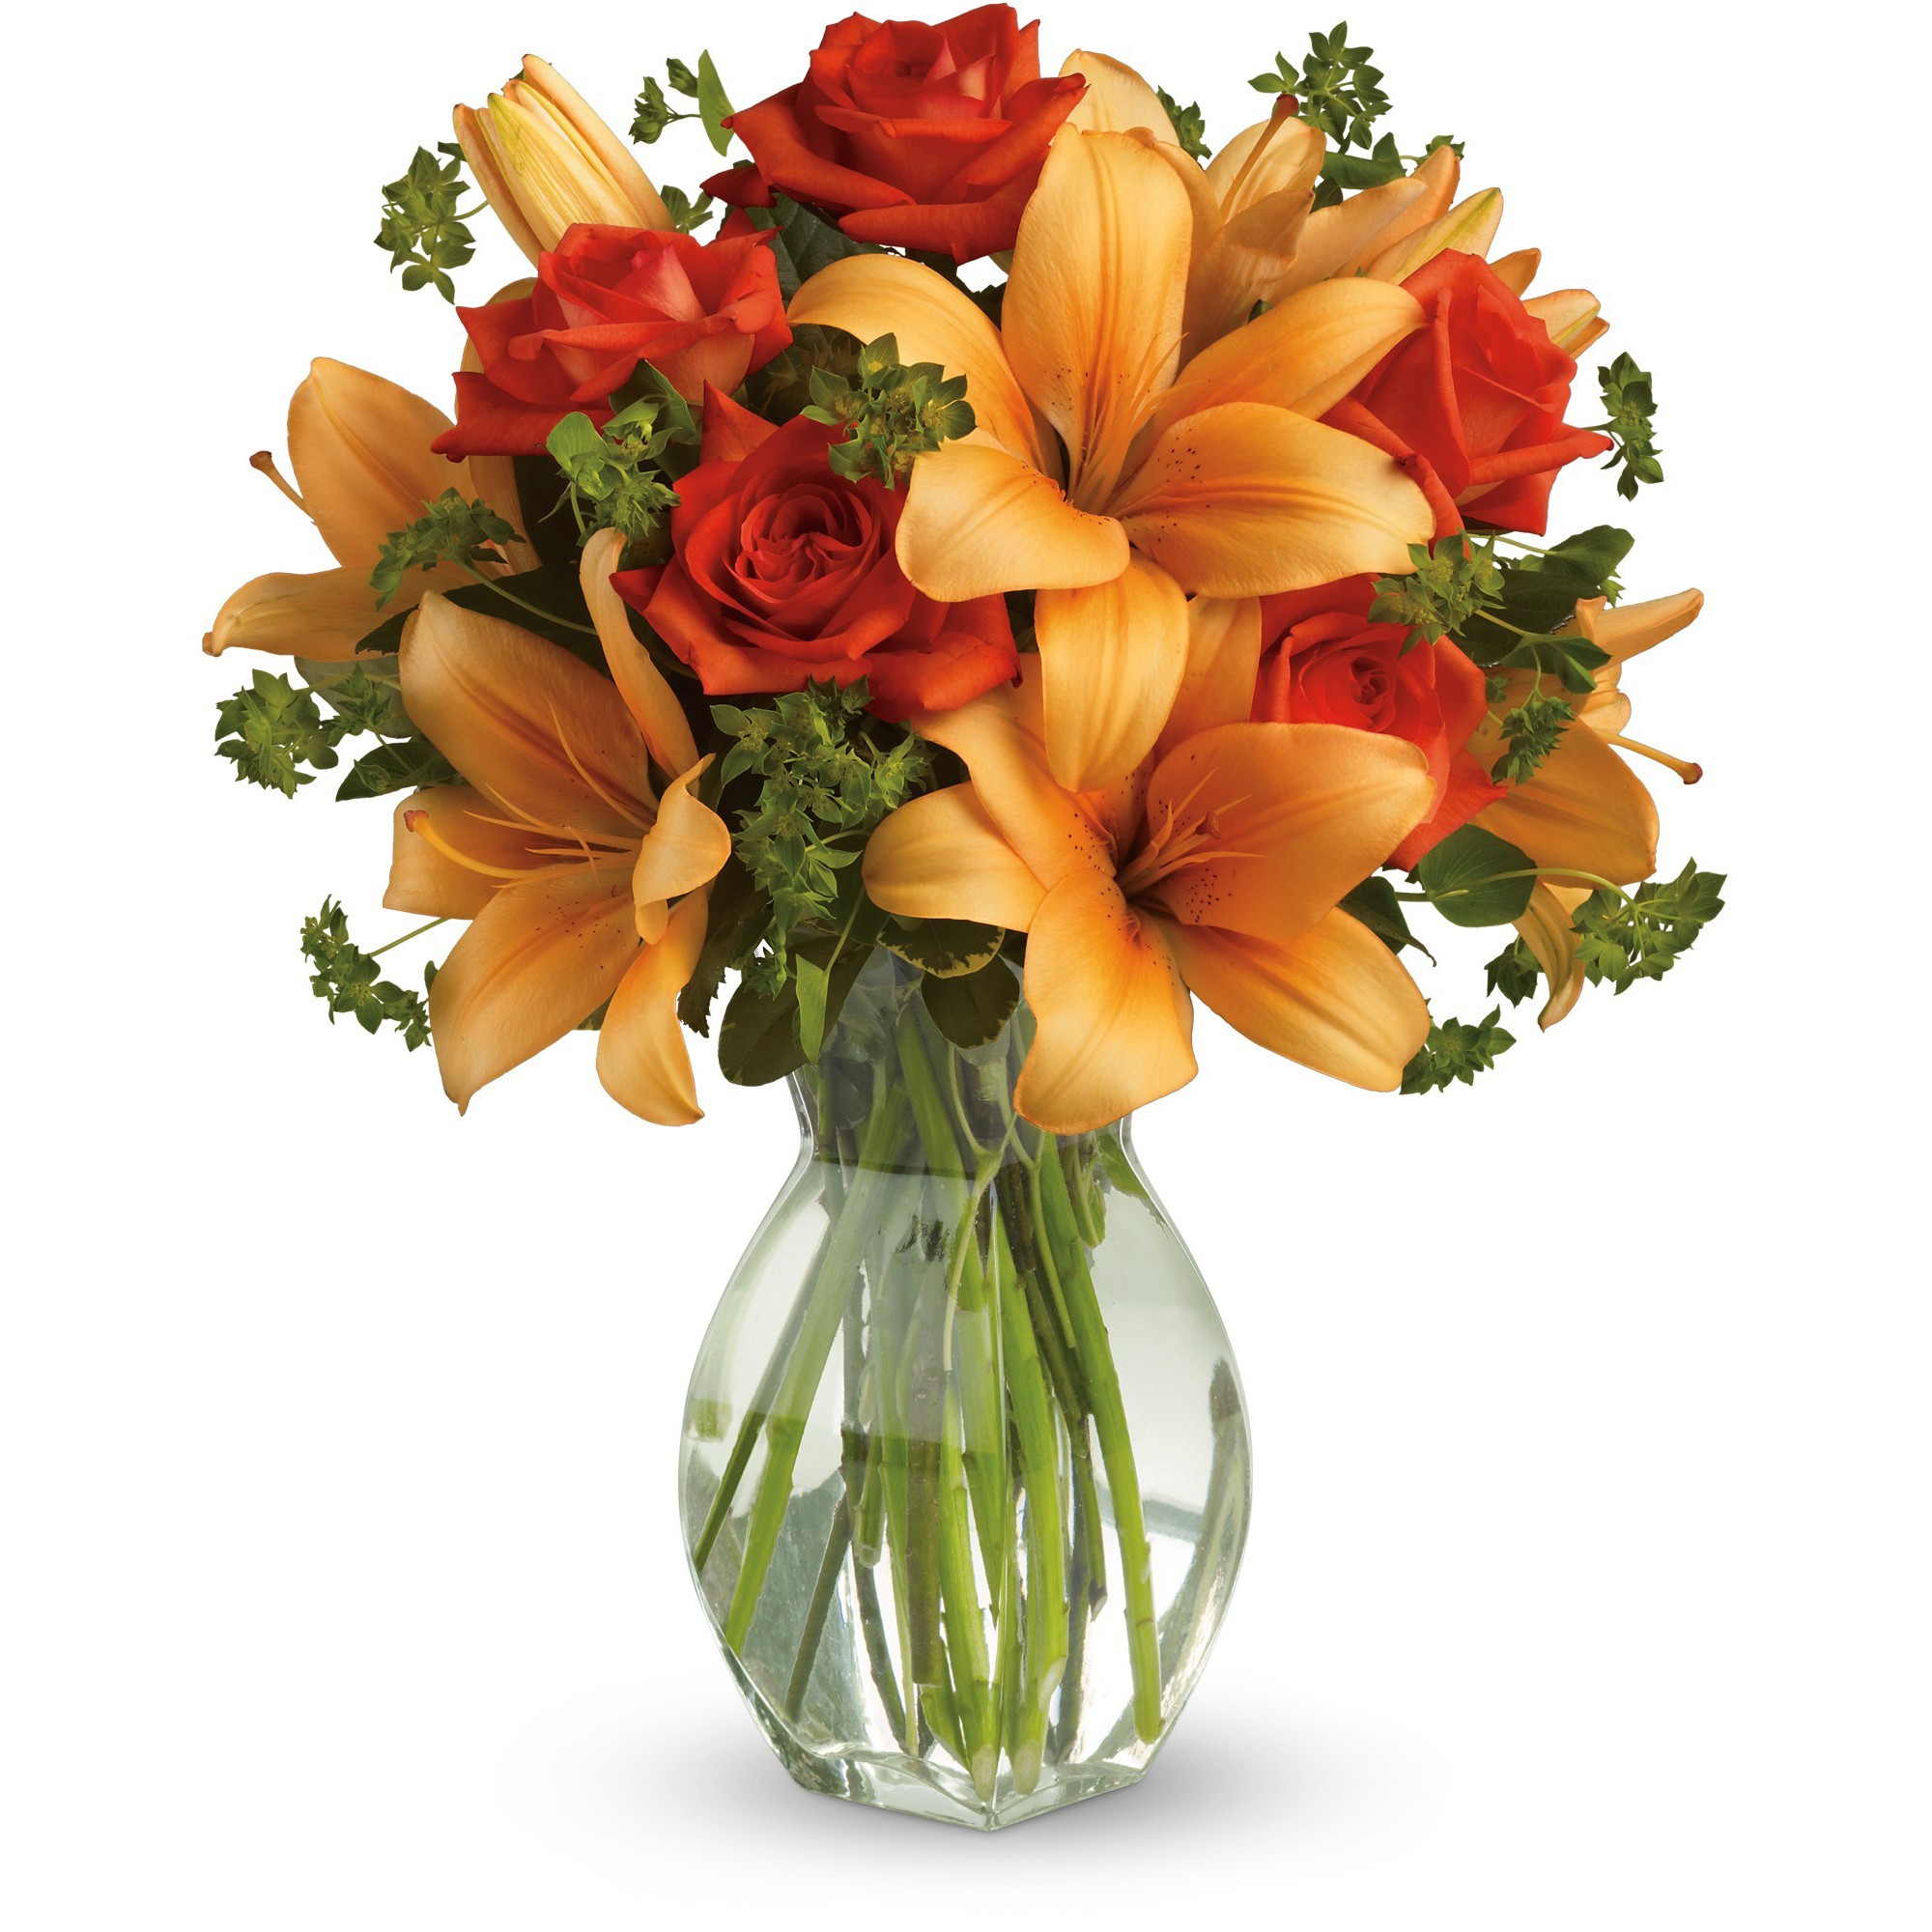 Fiery Lily and Rose by Teleflora in Central Square, NY | Leaf & Stem